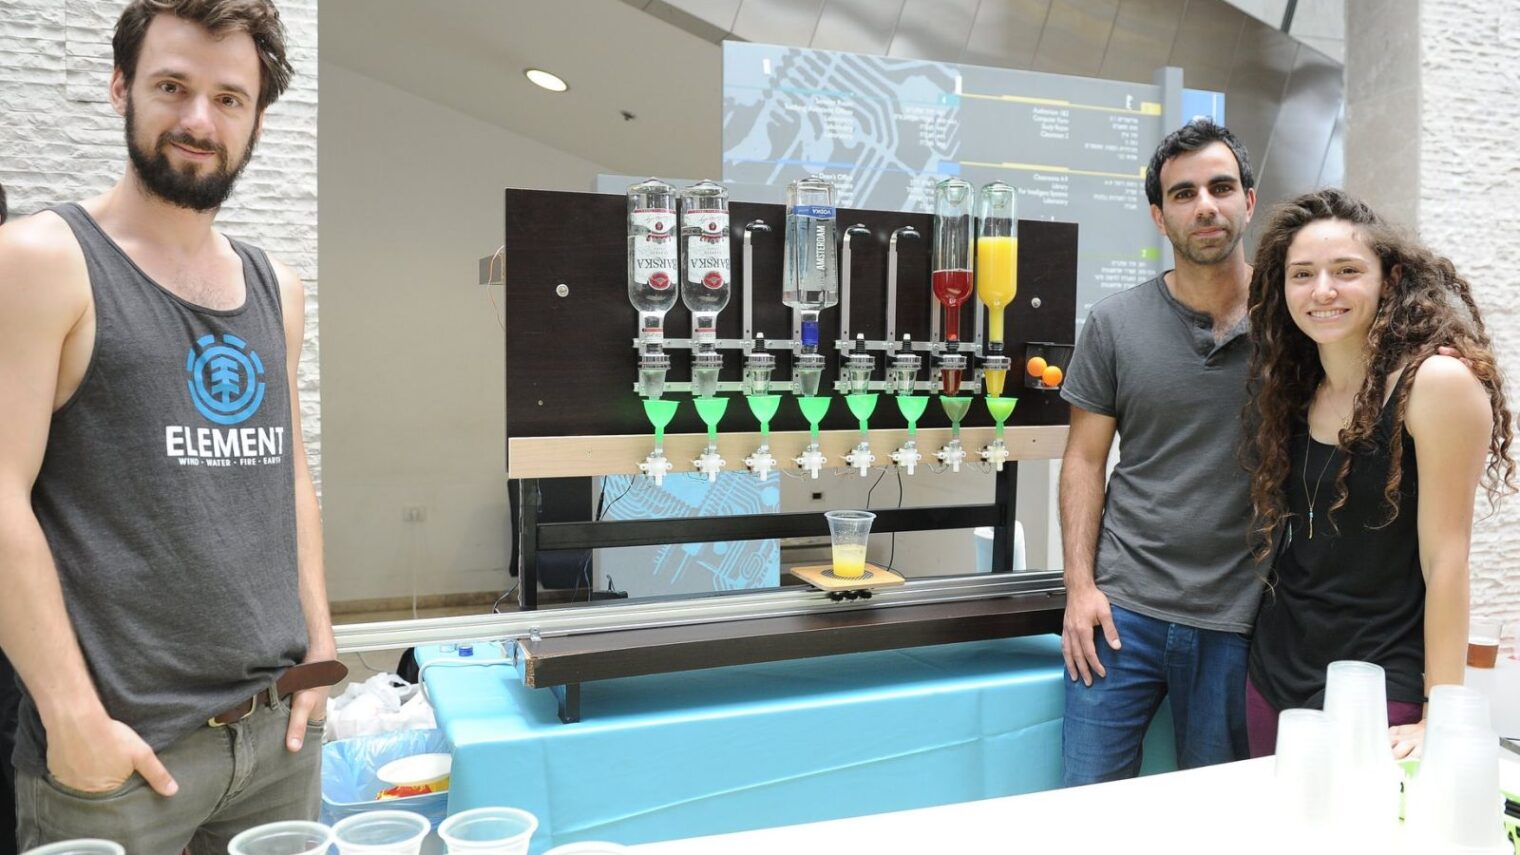 Robodrink photo courtesy of the Technion.